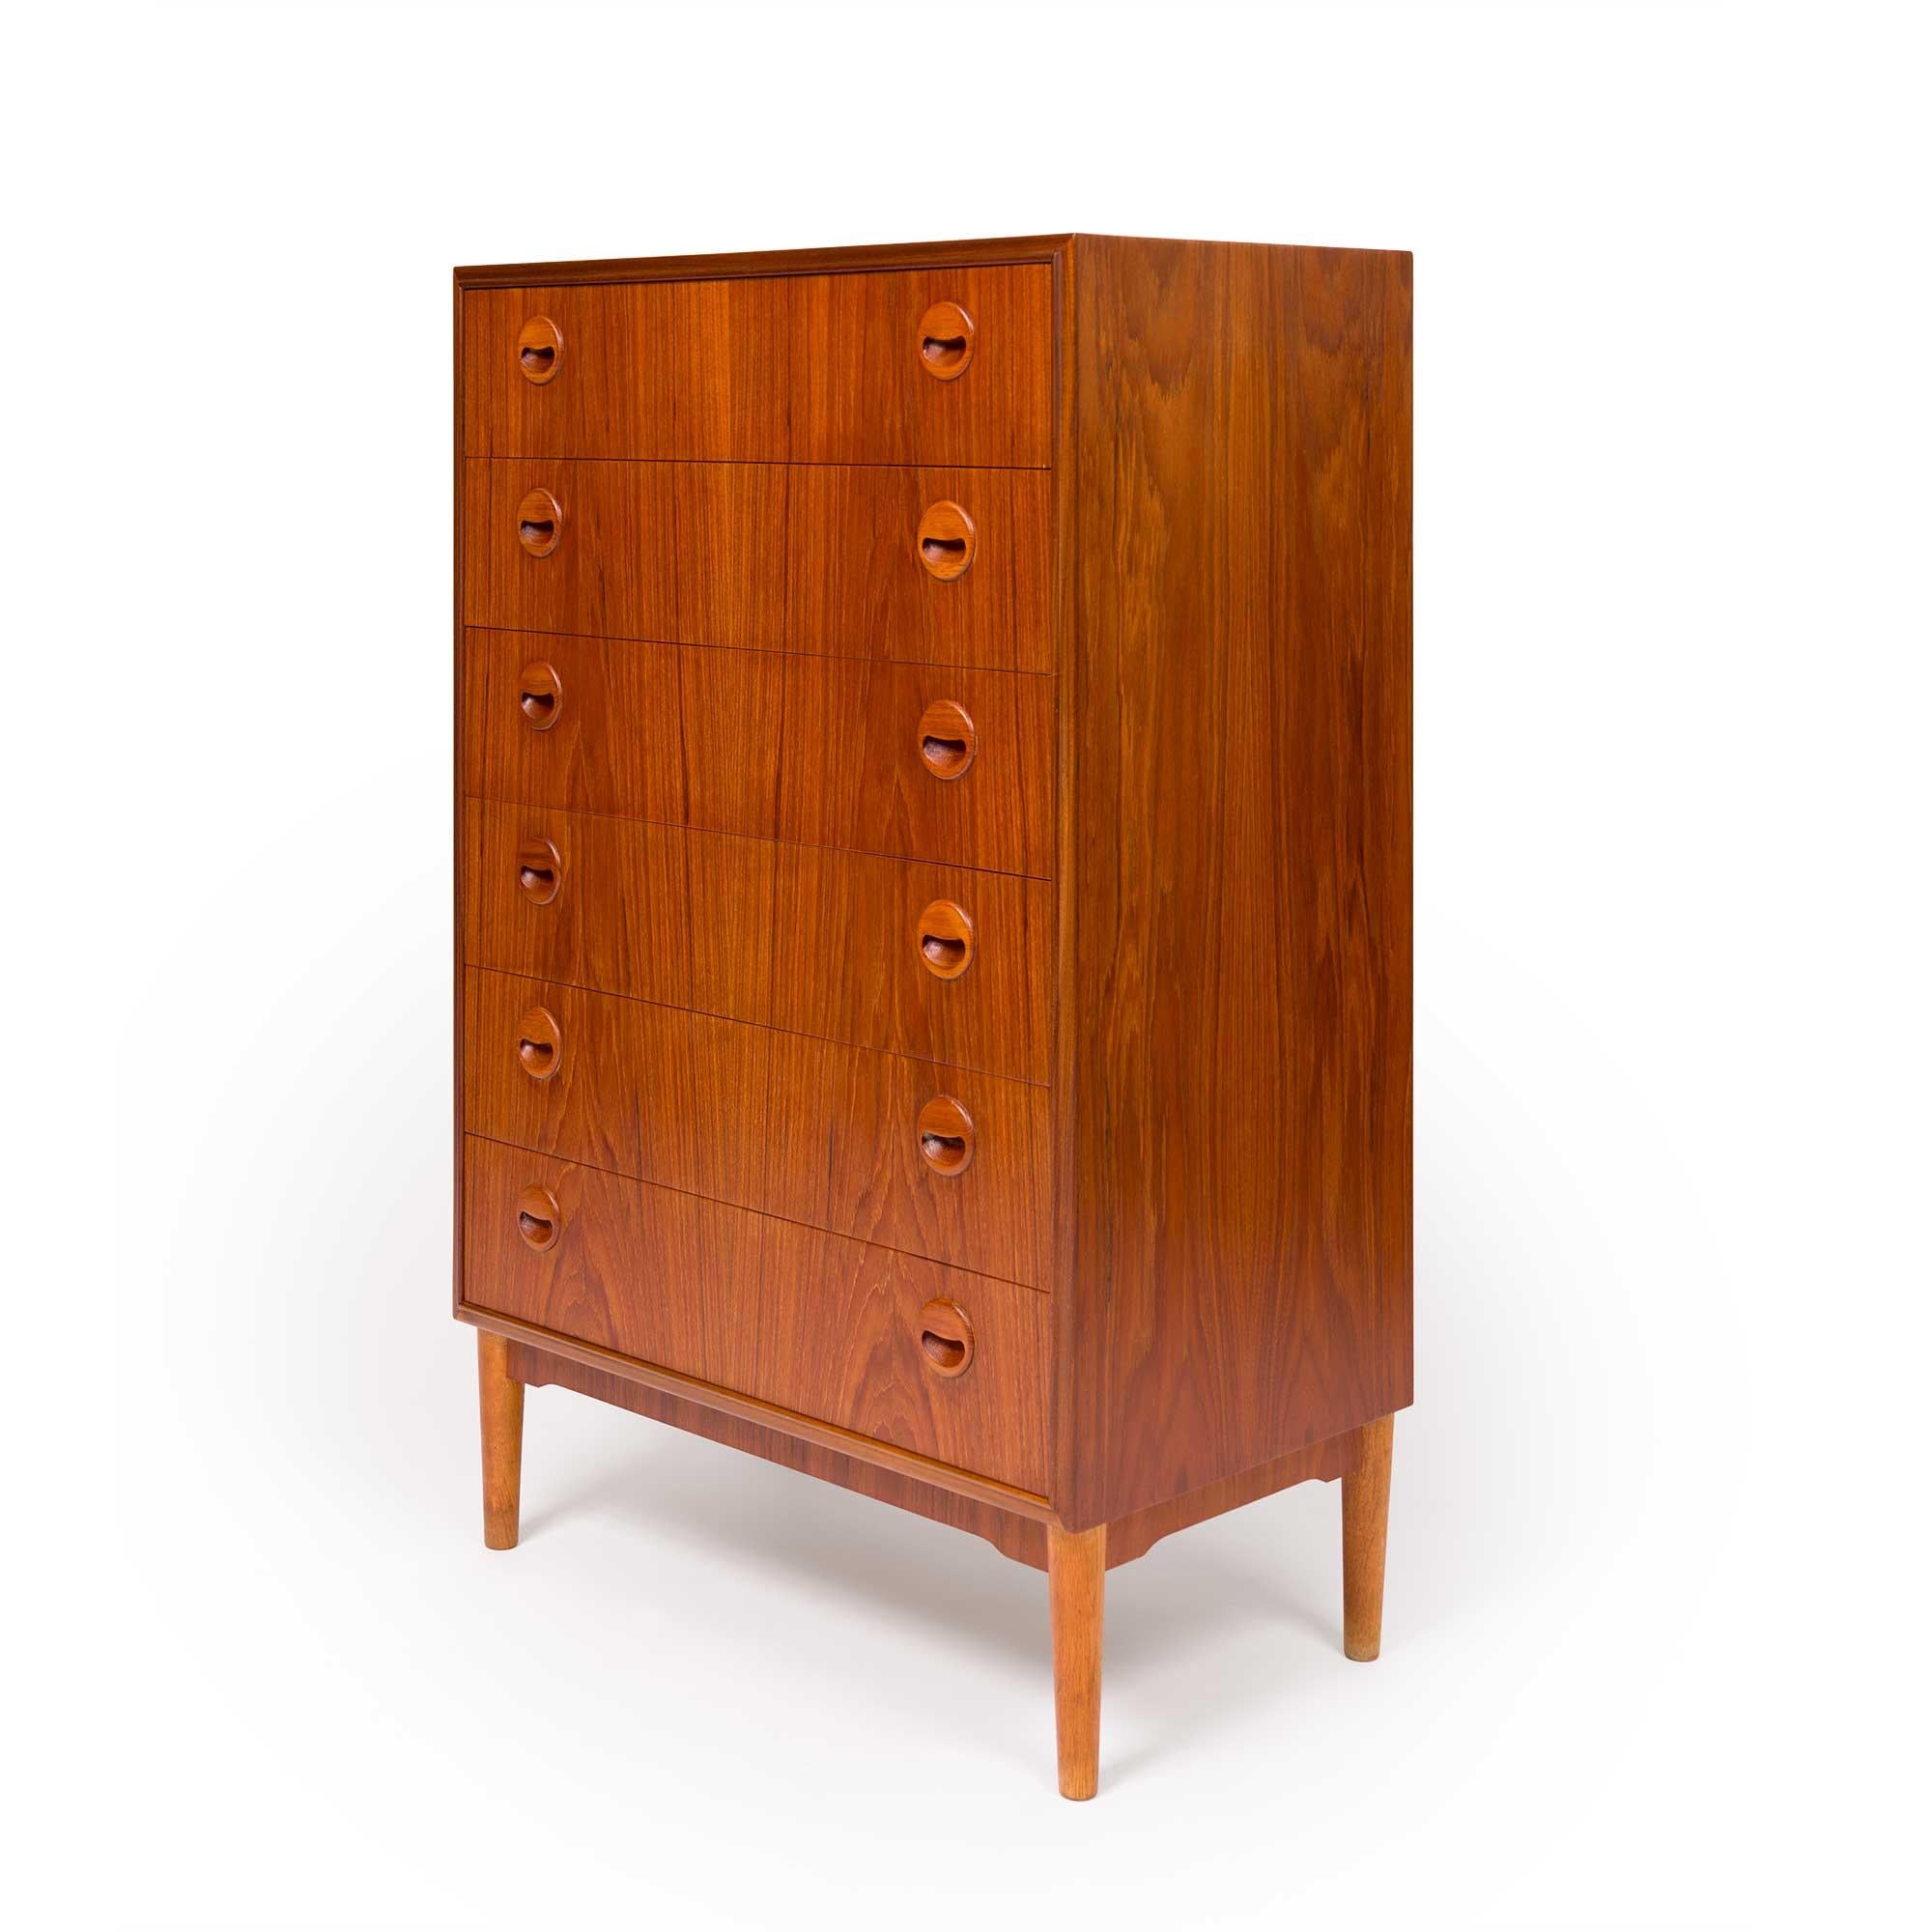 This beautifully constructed Danish mid-century teak tallboy chest of drawers was manufactured in the Demark in the 1960s. This stunning modern Danish mid-century Teak Tallboy with exquisite teak wood grain is a testament to unparalleled